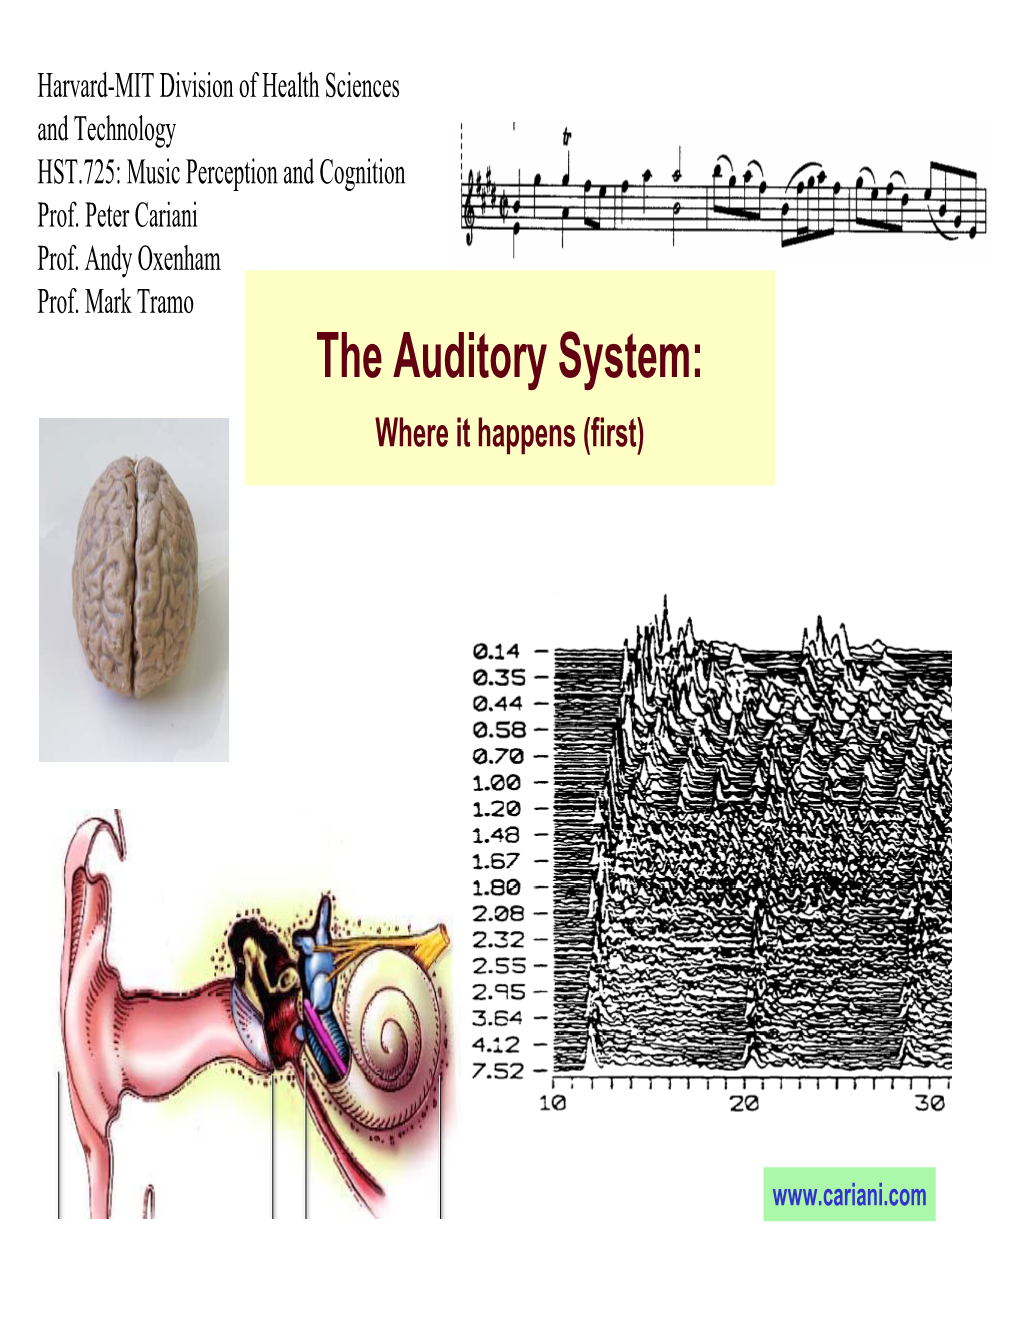 The Auditory System: Where It Happens (First)